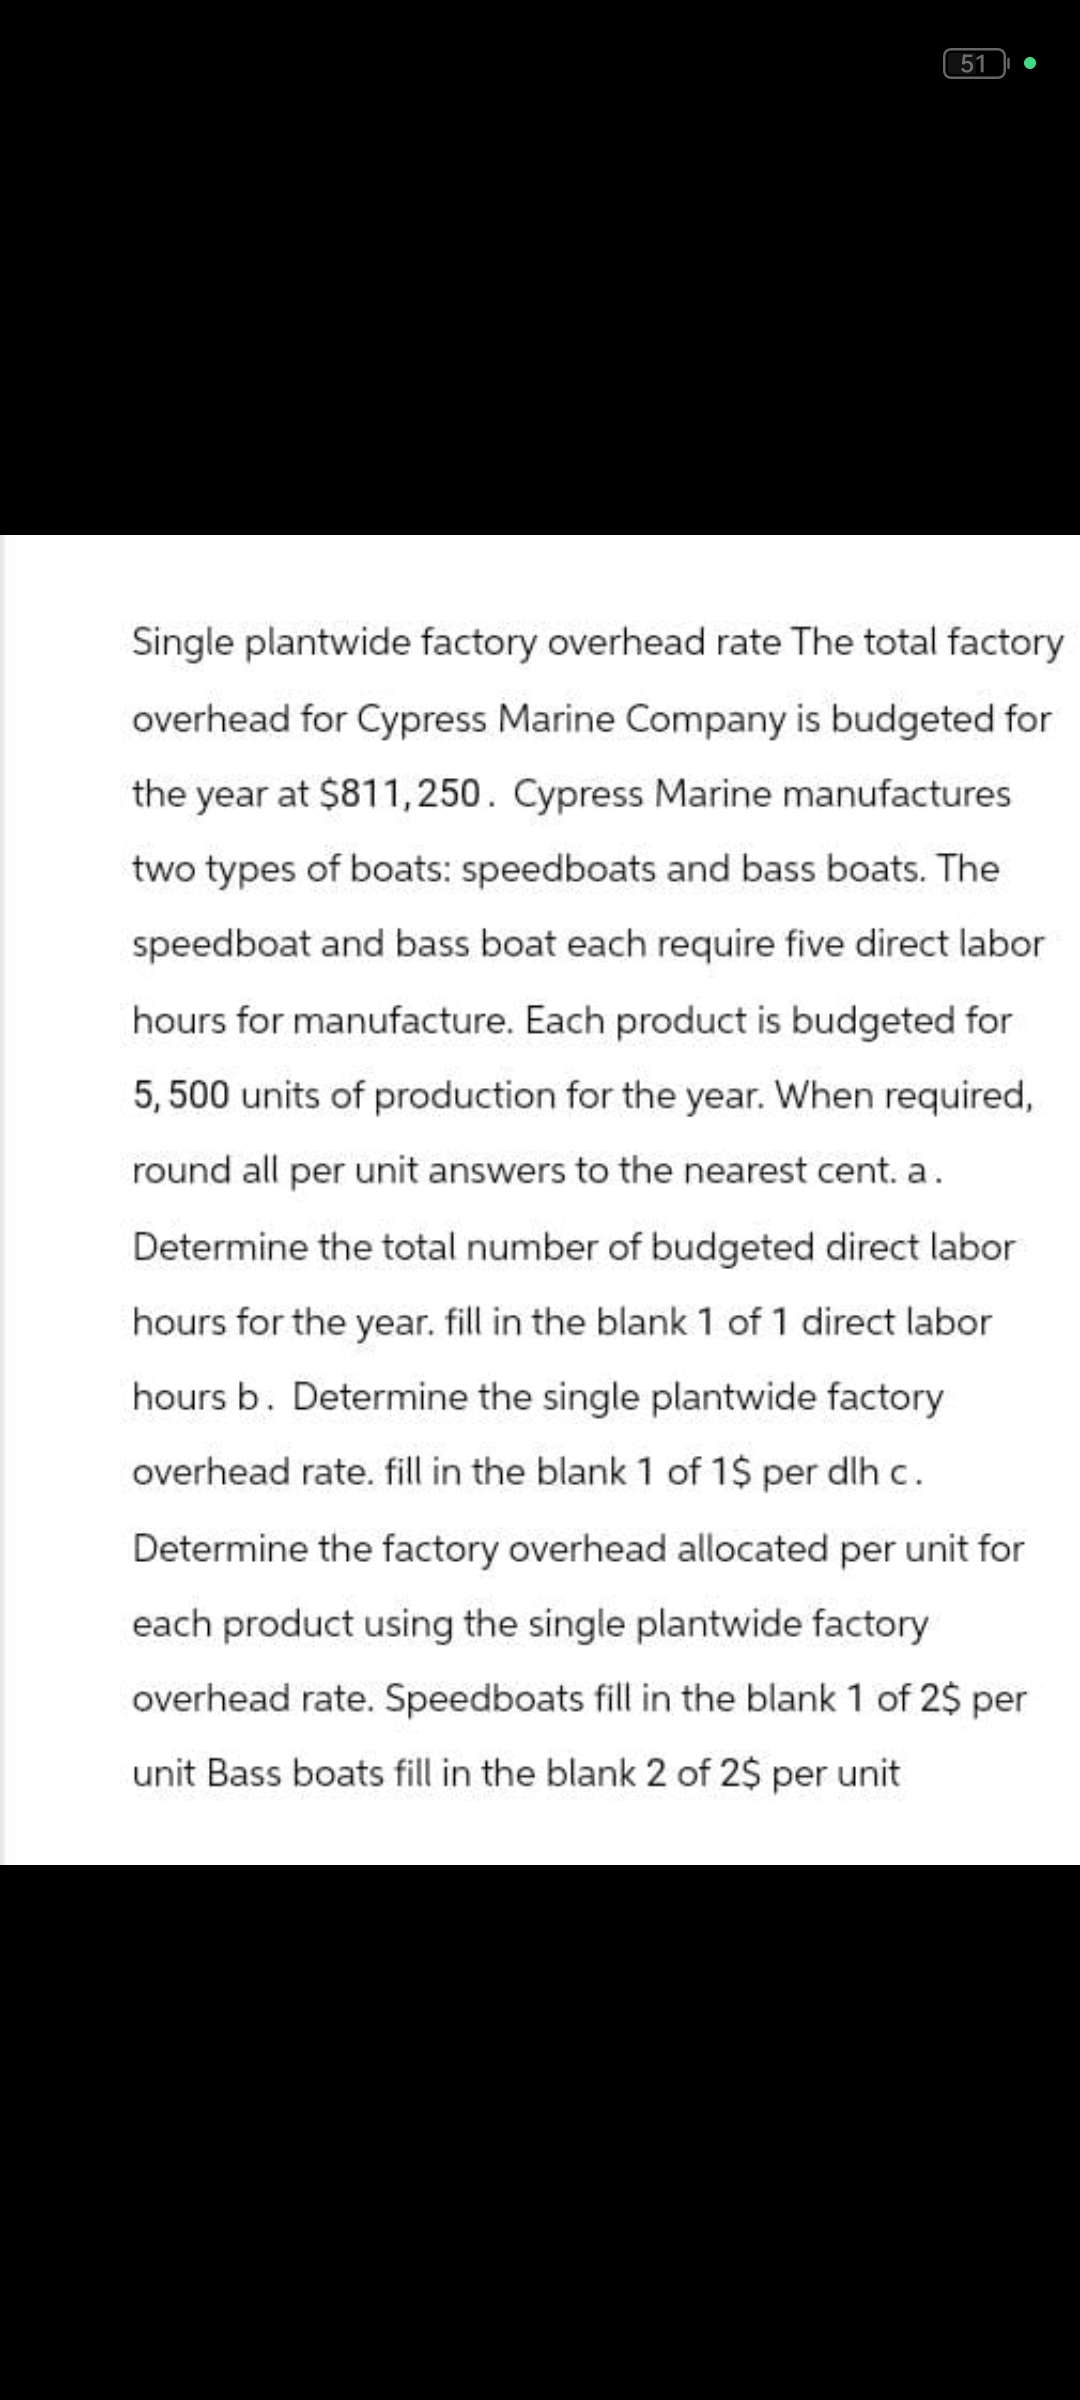 51
Single plantwide factory overhead rate The total factory
overhead for Cypress Marine Company is budgeted for
the year at $811,250. Cypress Marine manufactures
two types of boats: speedboats and bass boats. The
speedboat and bass boat each require five direct labor
hours for manufacture. Each product is budgeted for
5,500 units of production for the year. When required,
round all per unit answers to the nearest cent. a.
Determine the total number of budgeted direct labor
hours for the year. fill in the blank 1 of 1 direct labor
hours b. Determine the single plantwide factory
overhead rate. fill in the blank 1 of 1$ per dlh c.
Determine the factory overhead allocated per unit for
each product using the single plantwide factory
overhead rate. Speedboats fill in the blank 1 of 2$ per
unit Bass boats fill in the blank 2 of 2$ per unit